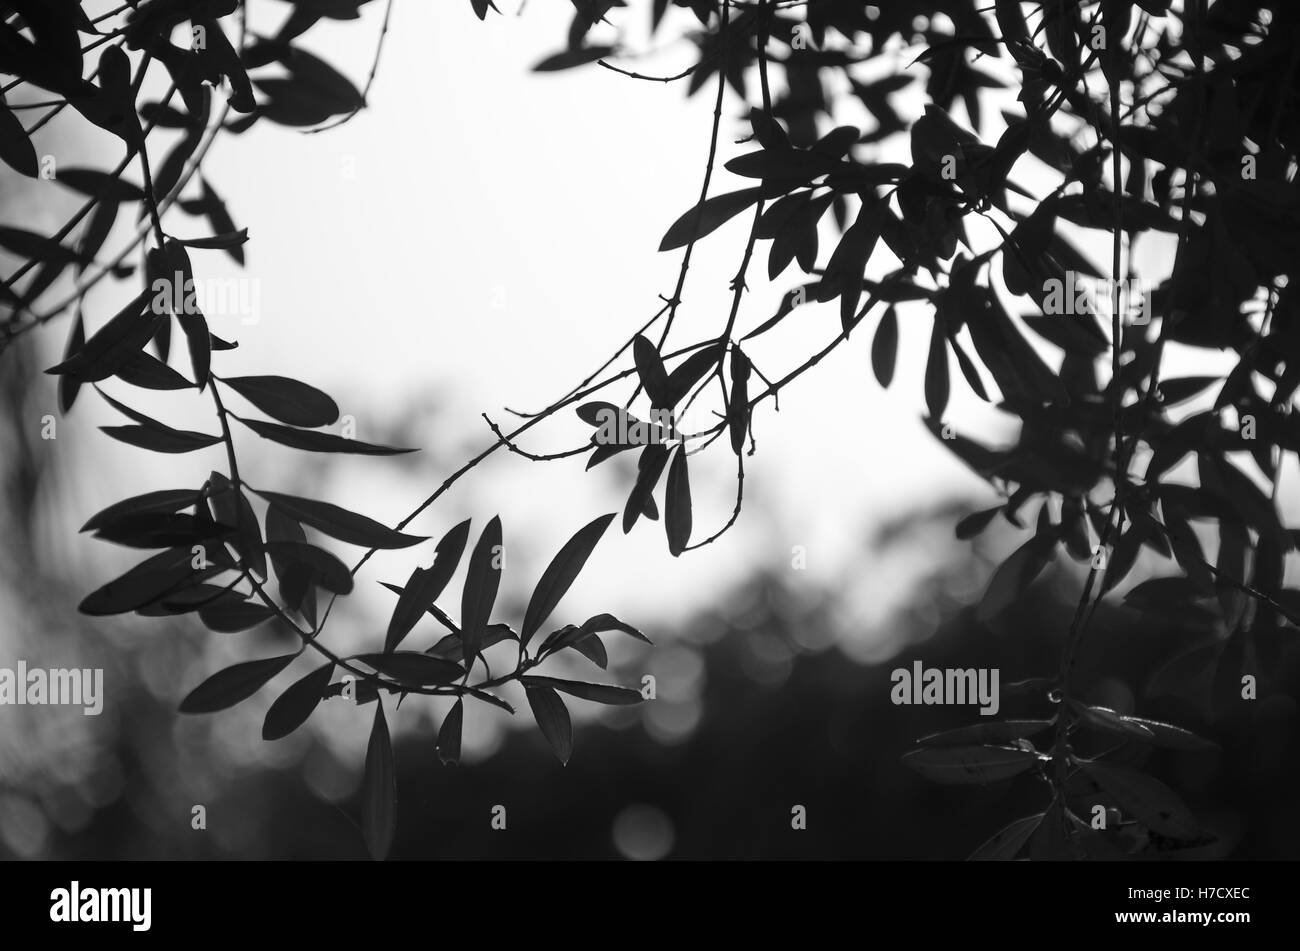 Background of olive leaves in a silhouette in black and white Stock Photo